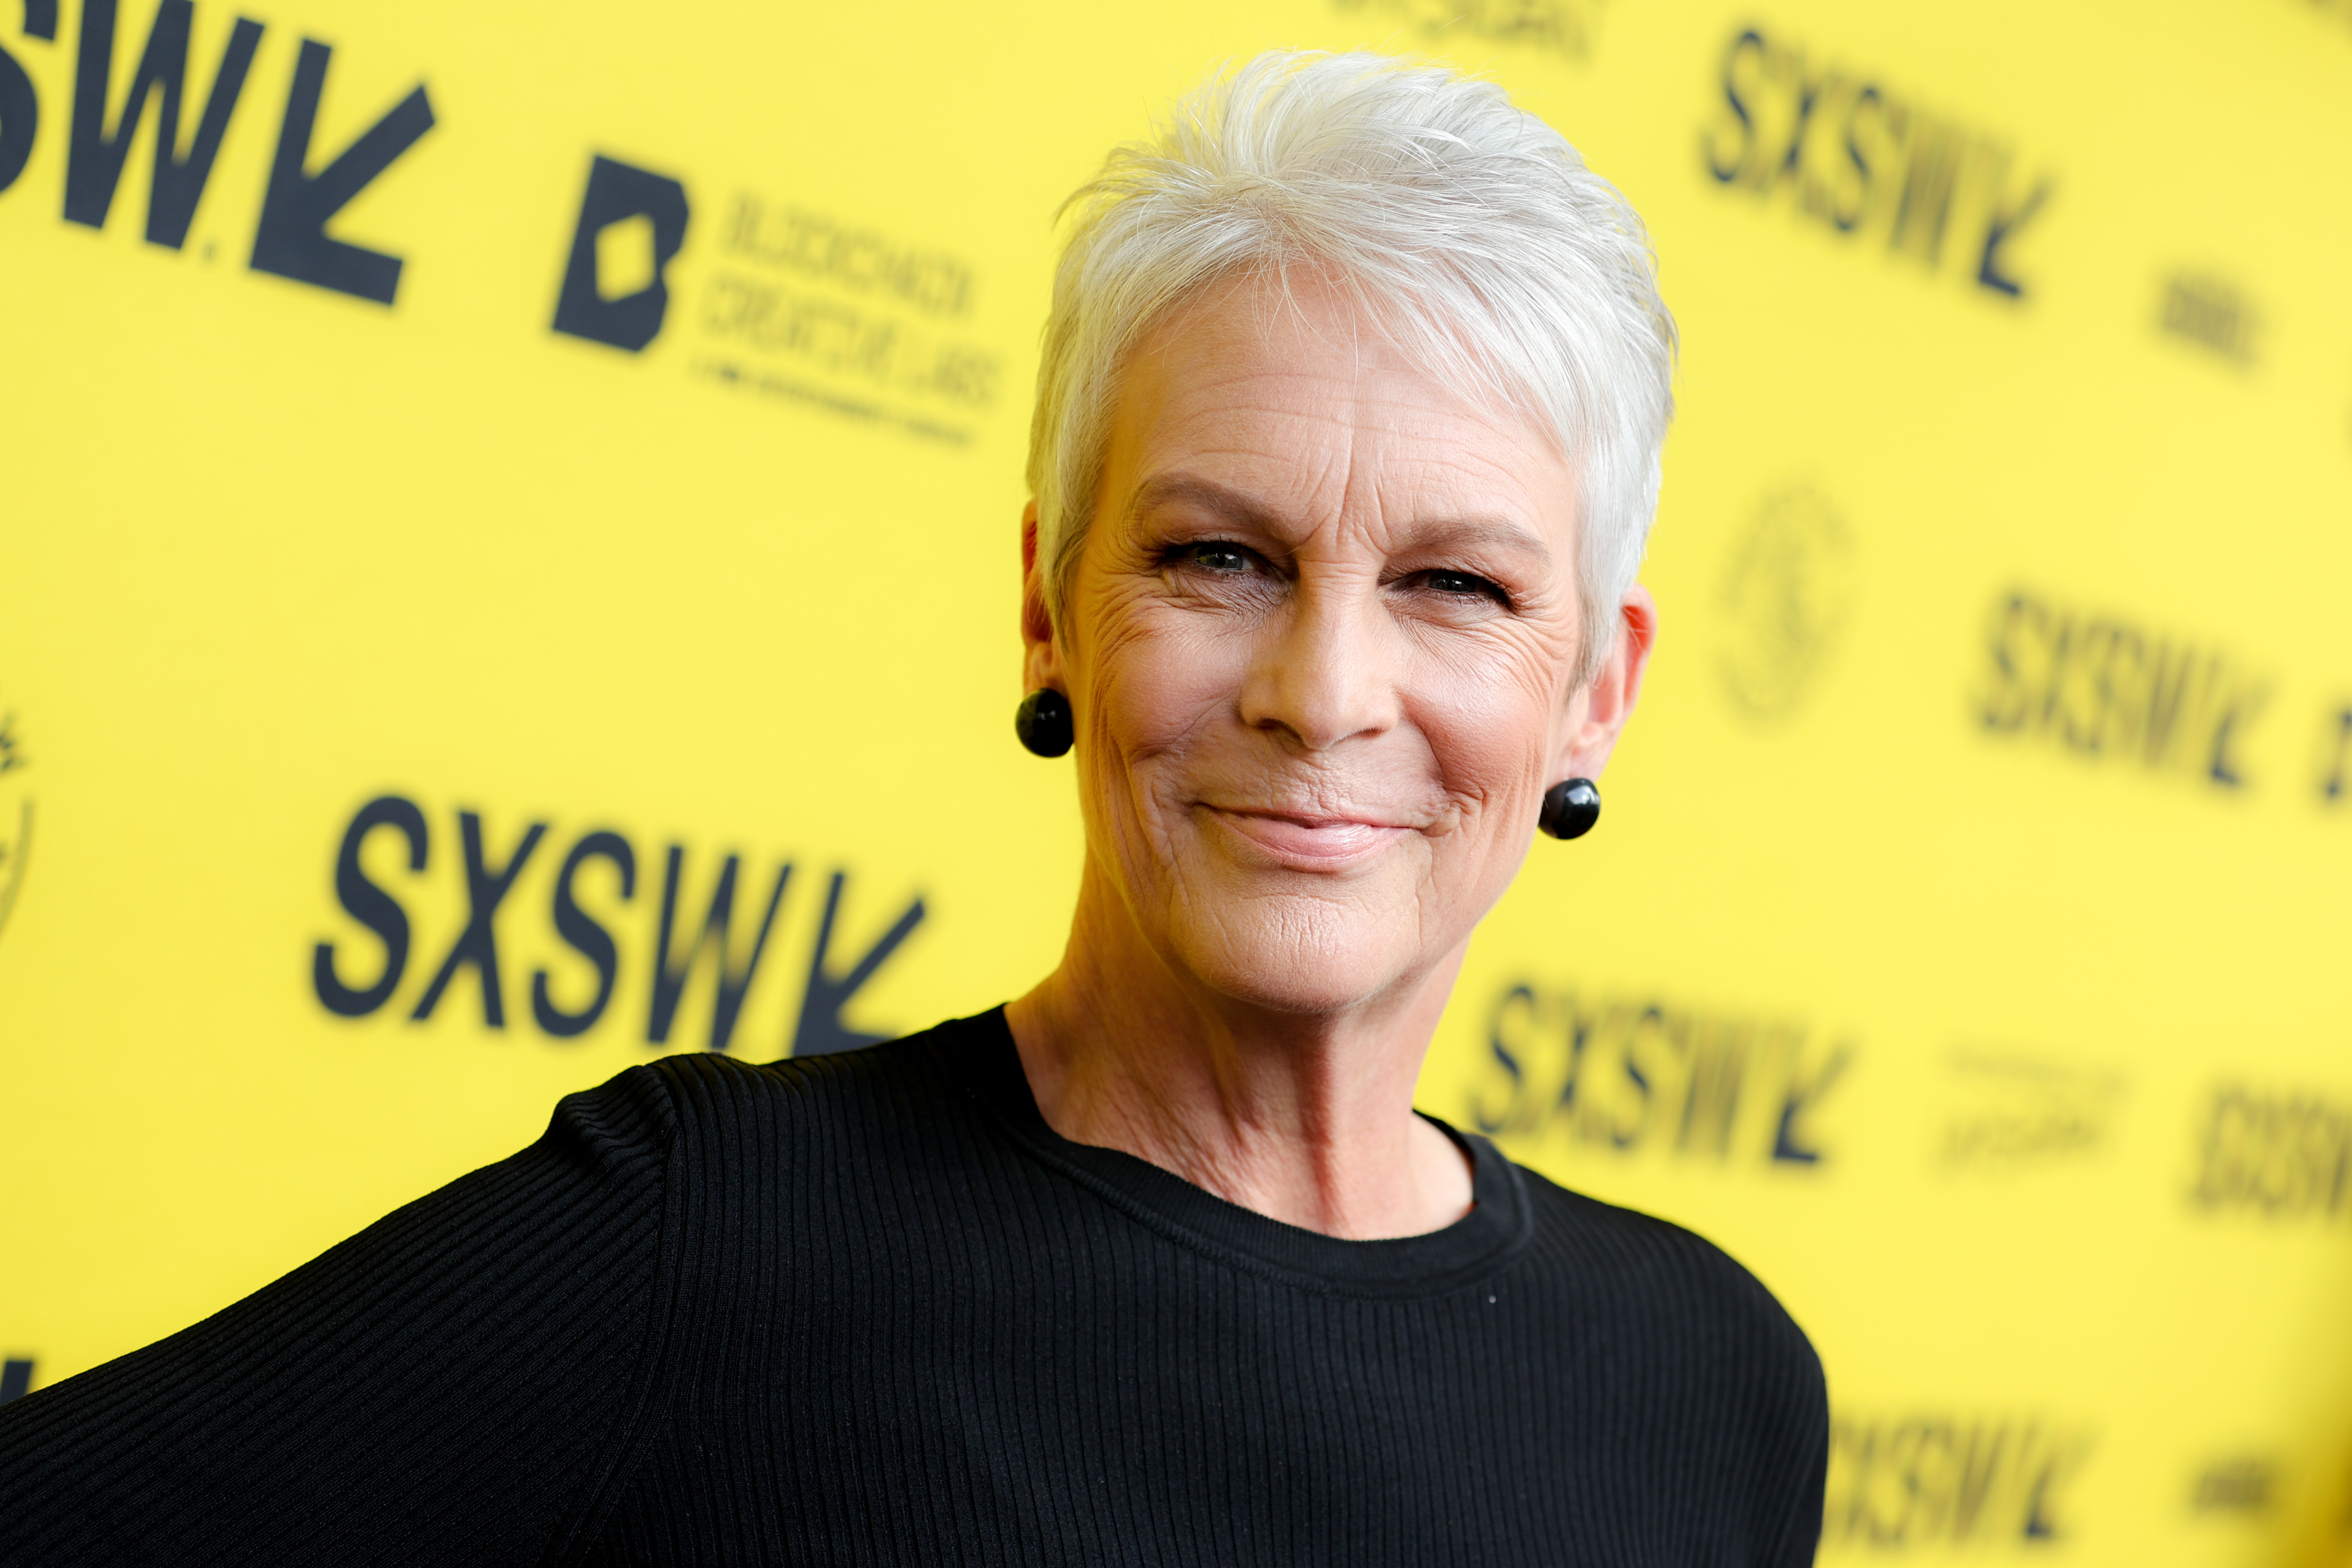 Jamie Lee Curtis à la première de "Everything Everywhere All At Once" en 2022 | Source : Getty Images